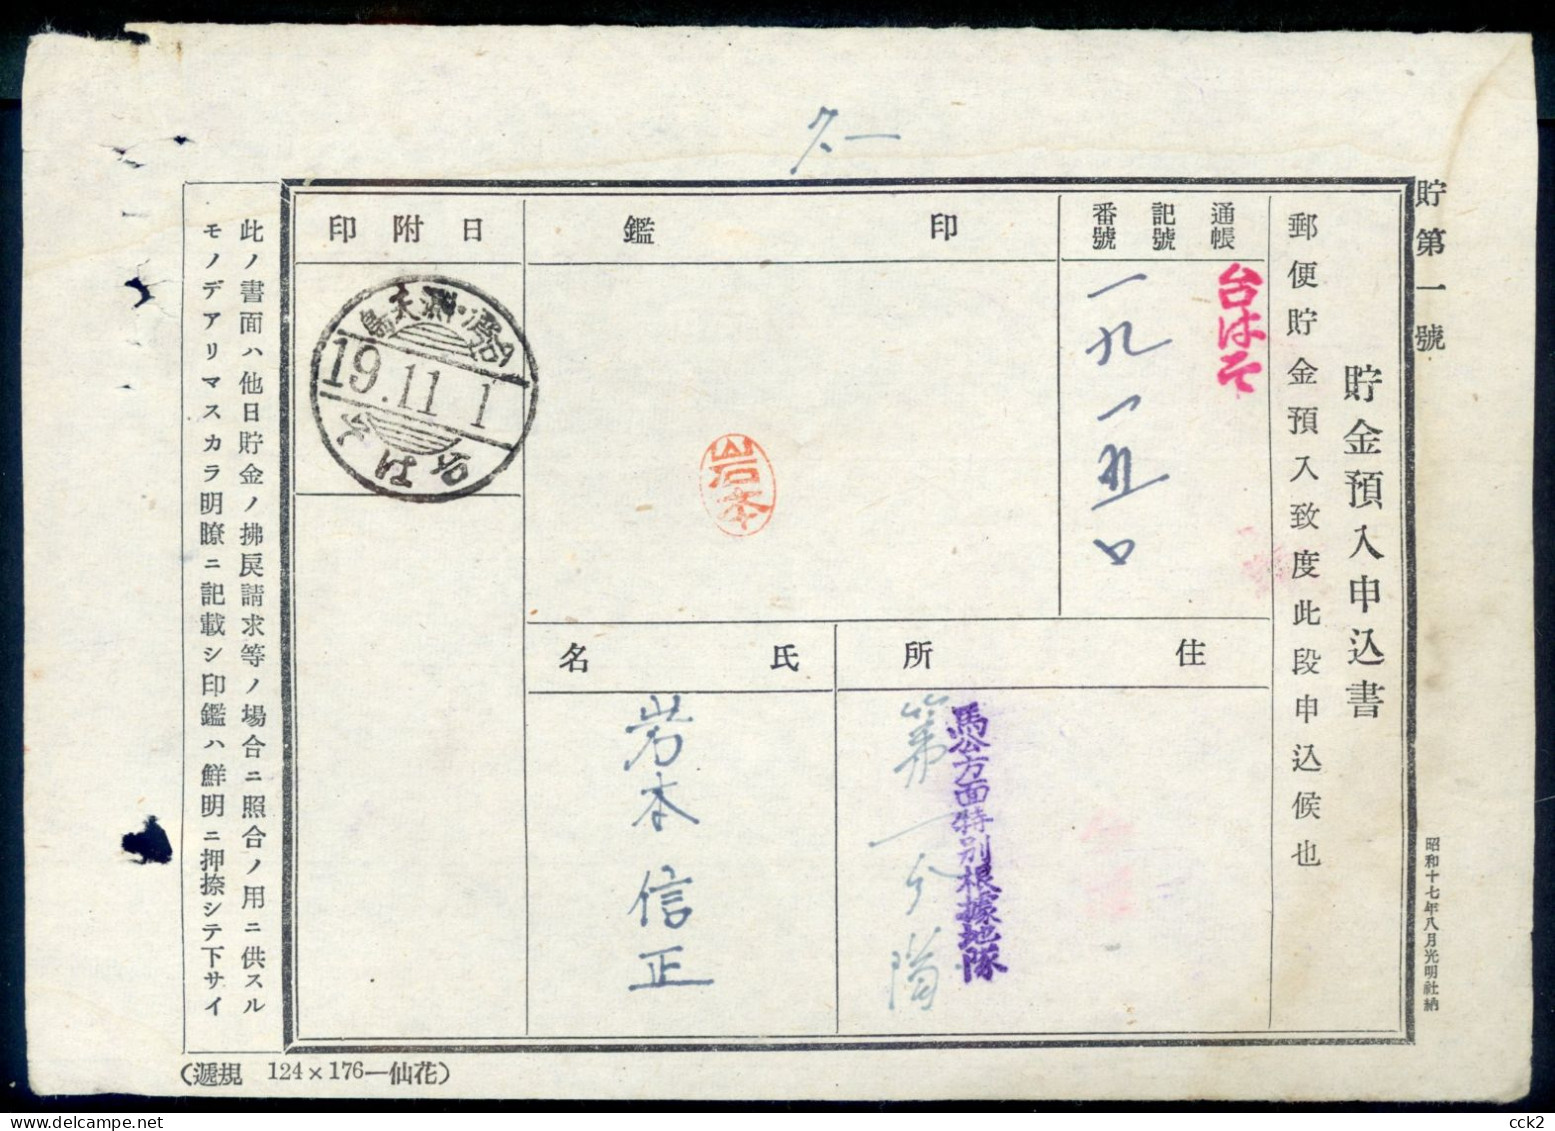 JAPAN OCCUPATION TAIWAN- Reserve Fund Early Entry Application Form(Taiwan Cetian Island) 19.11.1 - 1945 Occupazione Giapponese